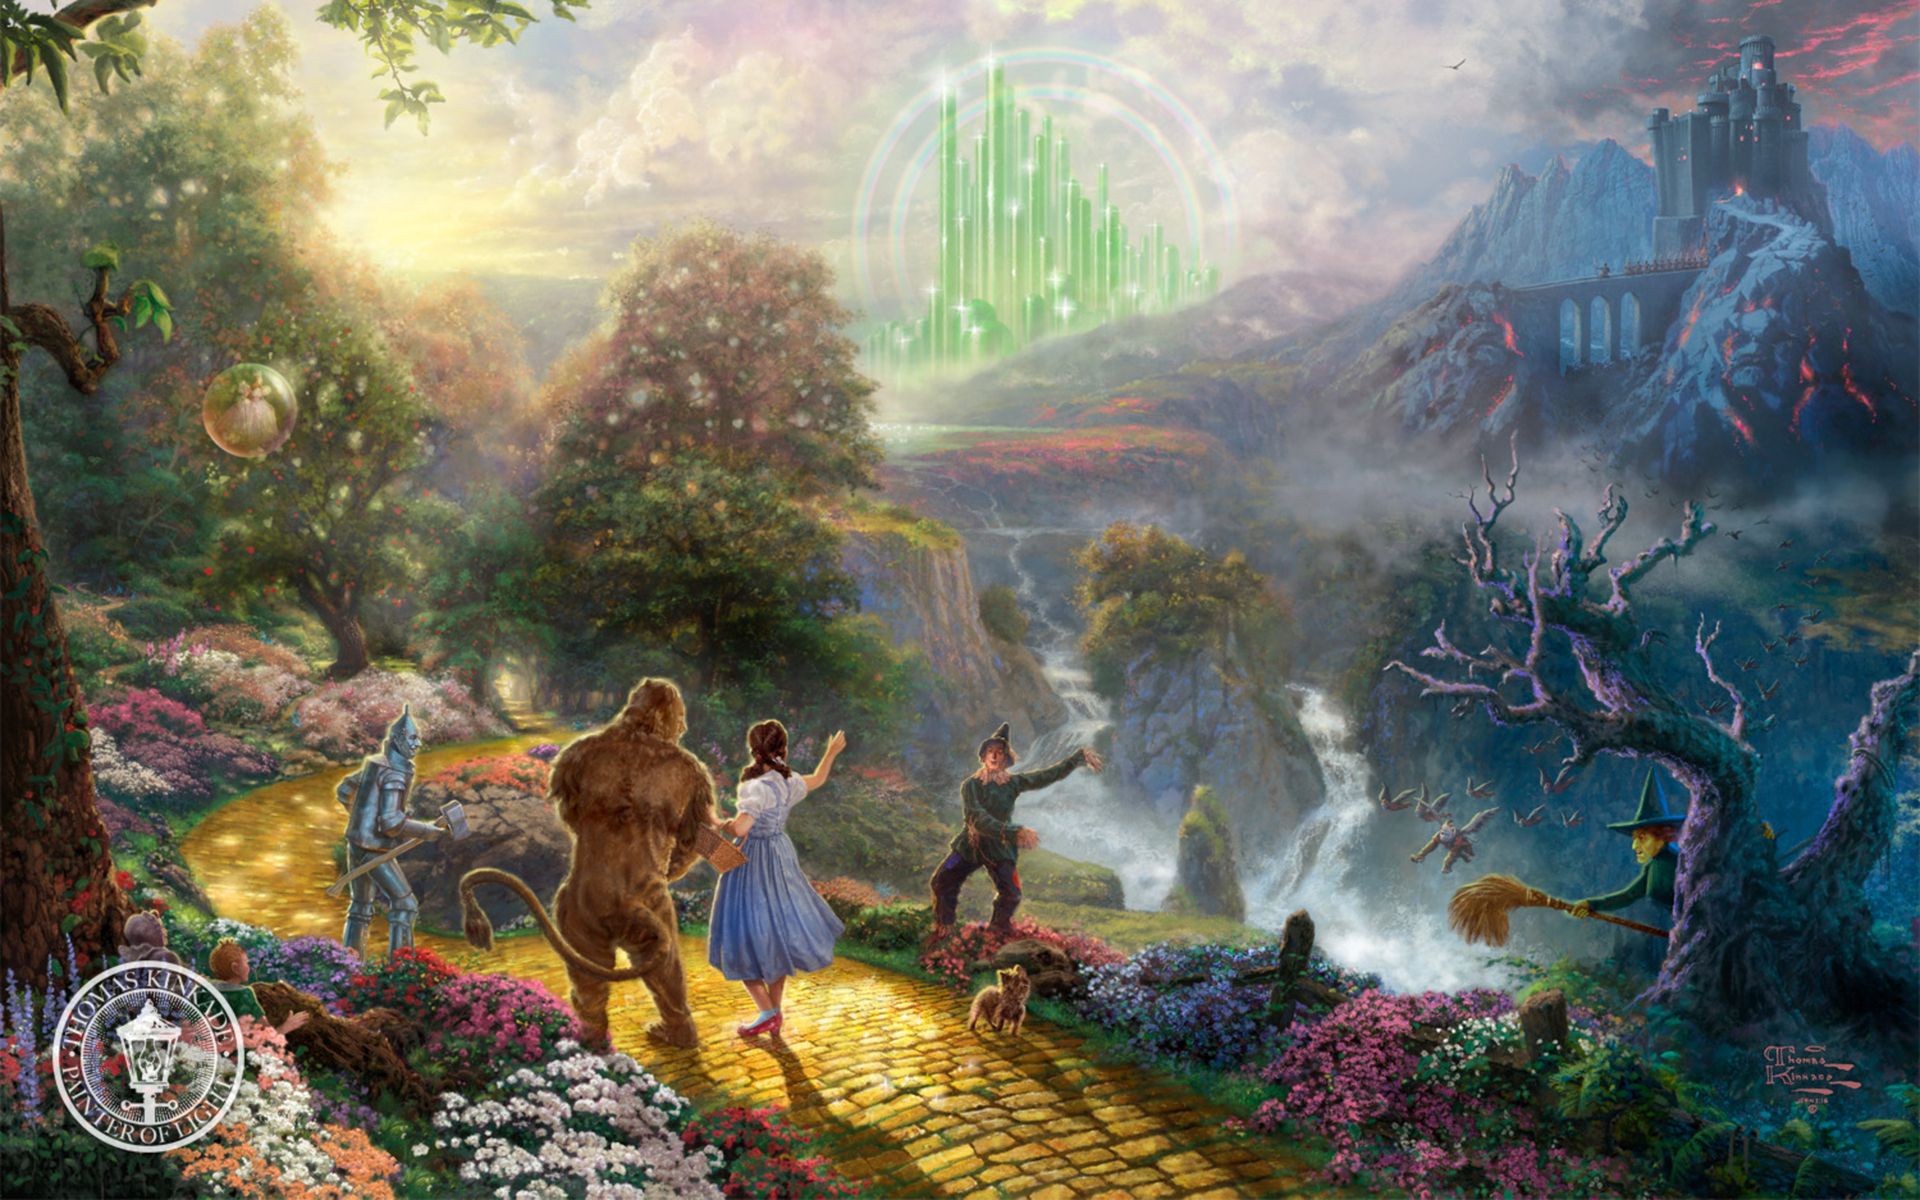 A painting of the characters from The Wizard of Oz walking down a yellow brick road towards a green emerald city. - 1920x1200